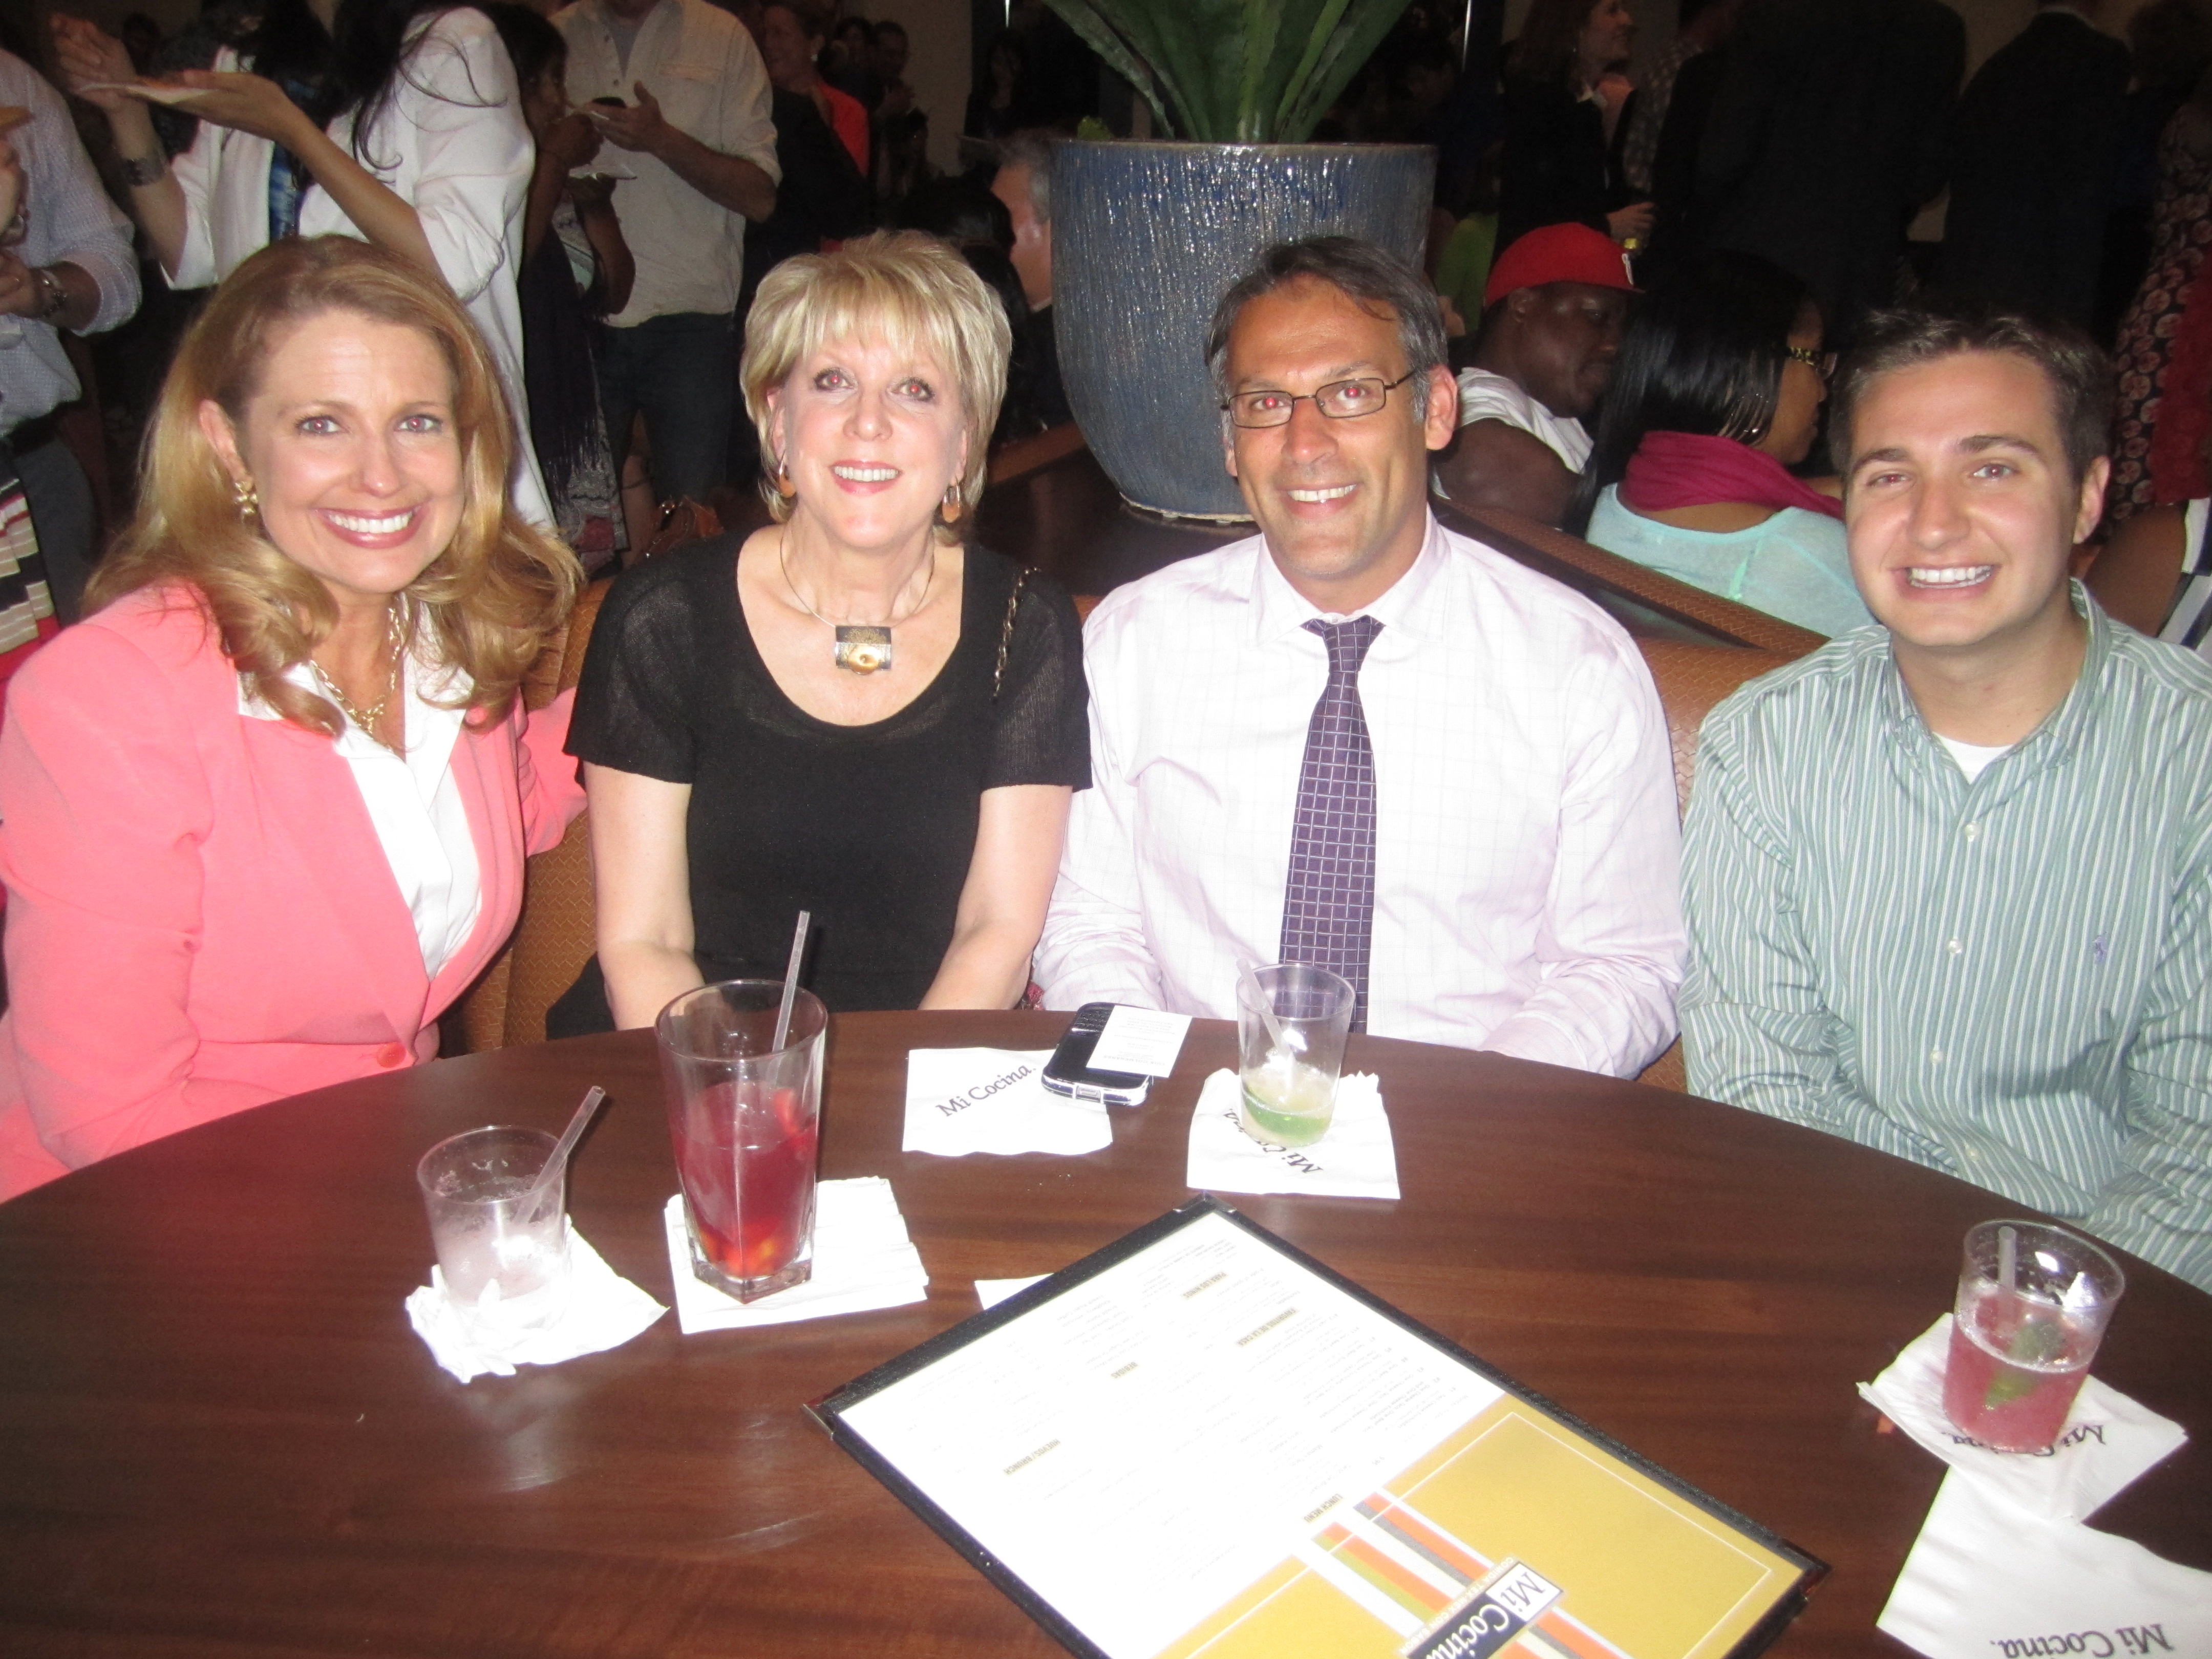 Opening Night at Chevy Chase’s Mi Cocina: Texans Do the Mambo